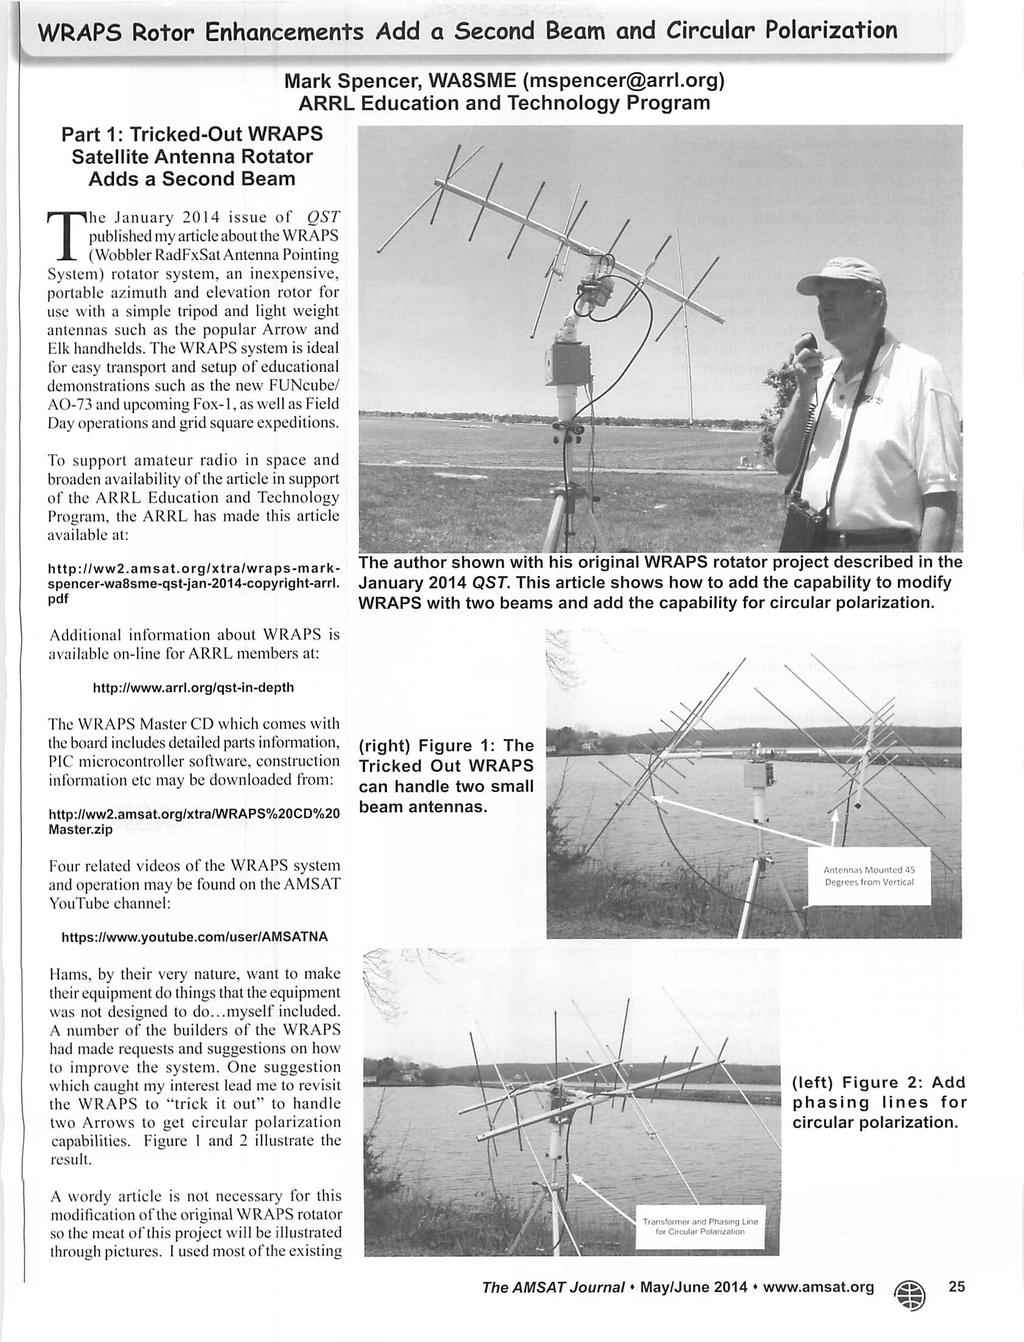 WRAPS Rotor Enhancements Add a Second Beam and Circular Polarization Part 1: Tricked-Out WRAPS Satellite Antenna Rotator Adds a Second Beam Mark Spencer, WA8SME (mspencer@arrl.